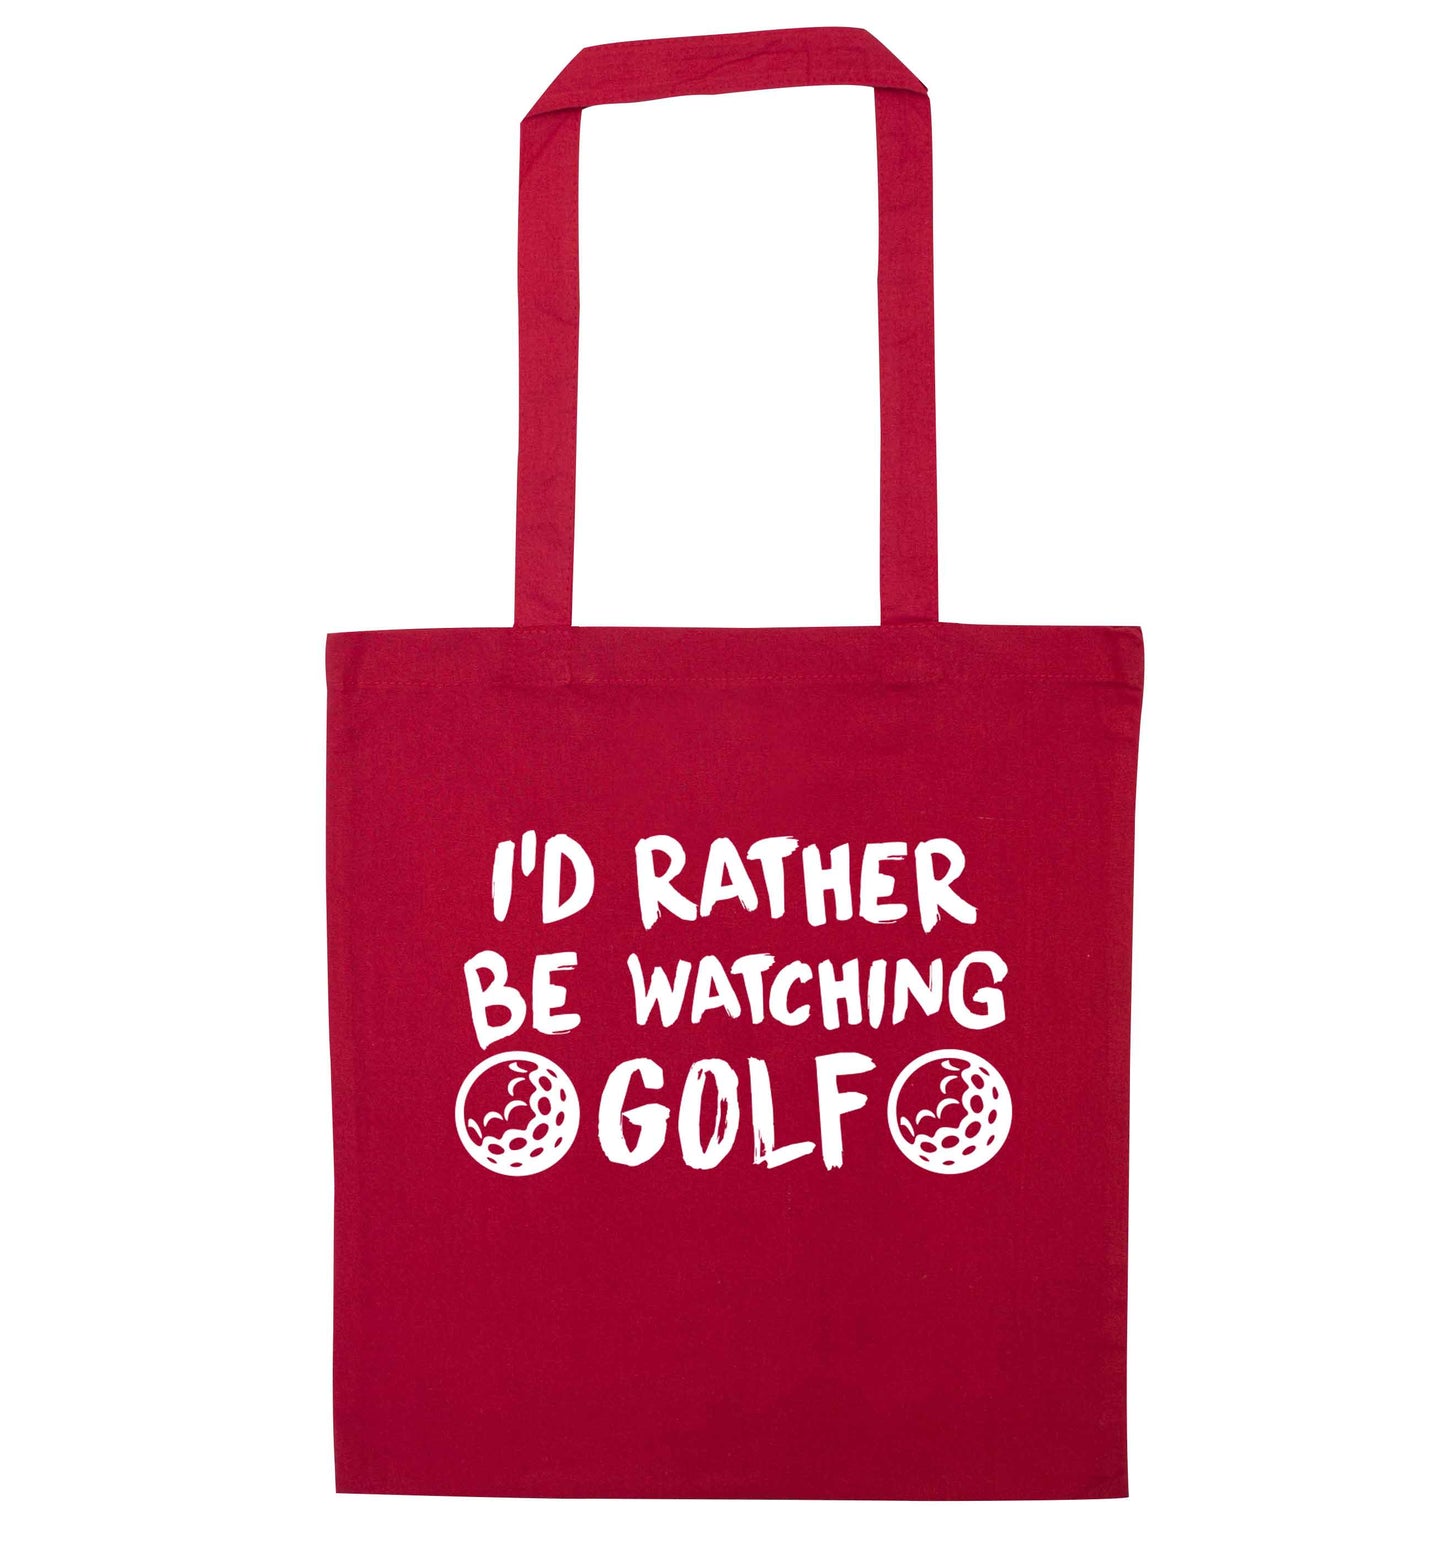 I'd rather be watching golf red tote bag